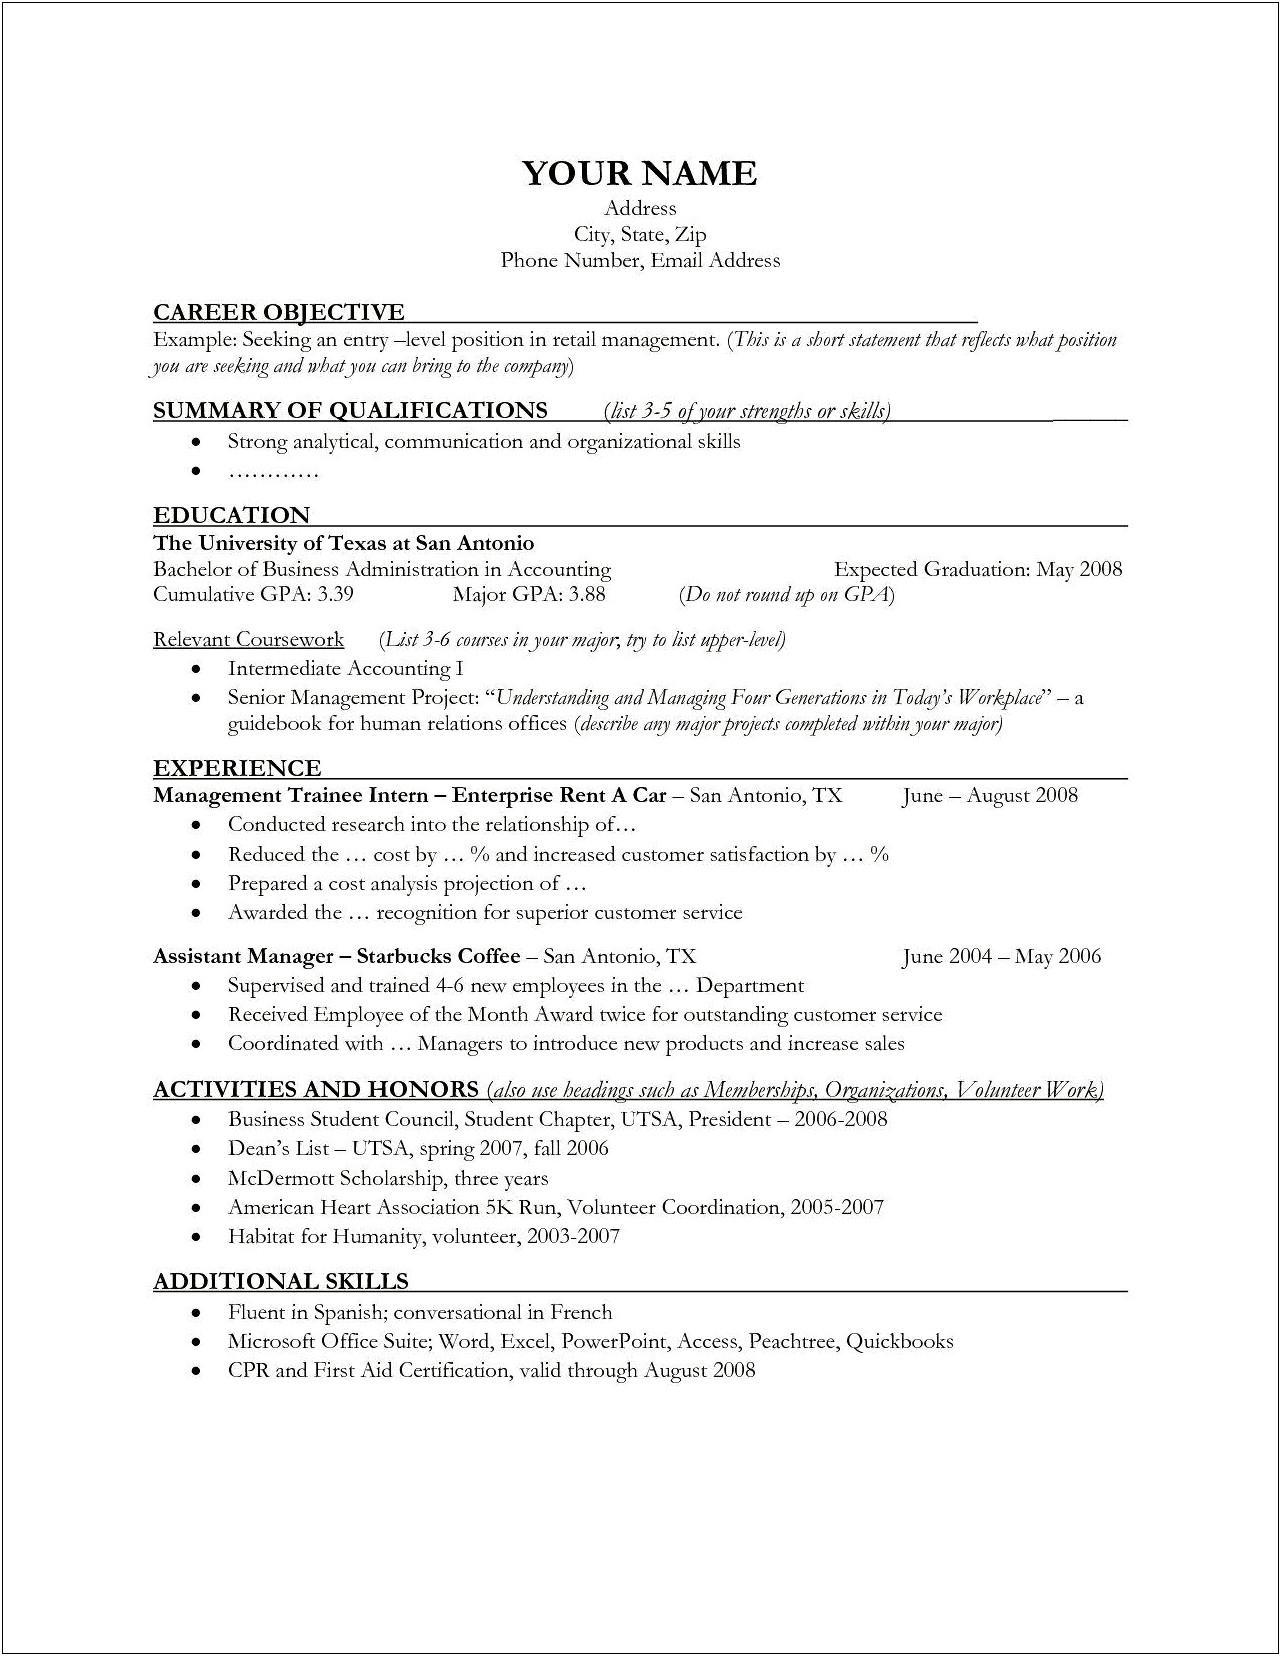 Resume Objective Statement Business Administration